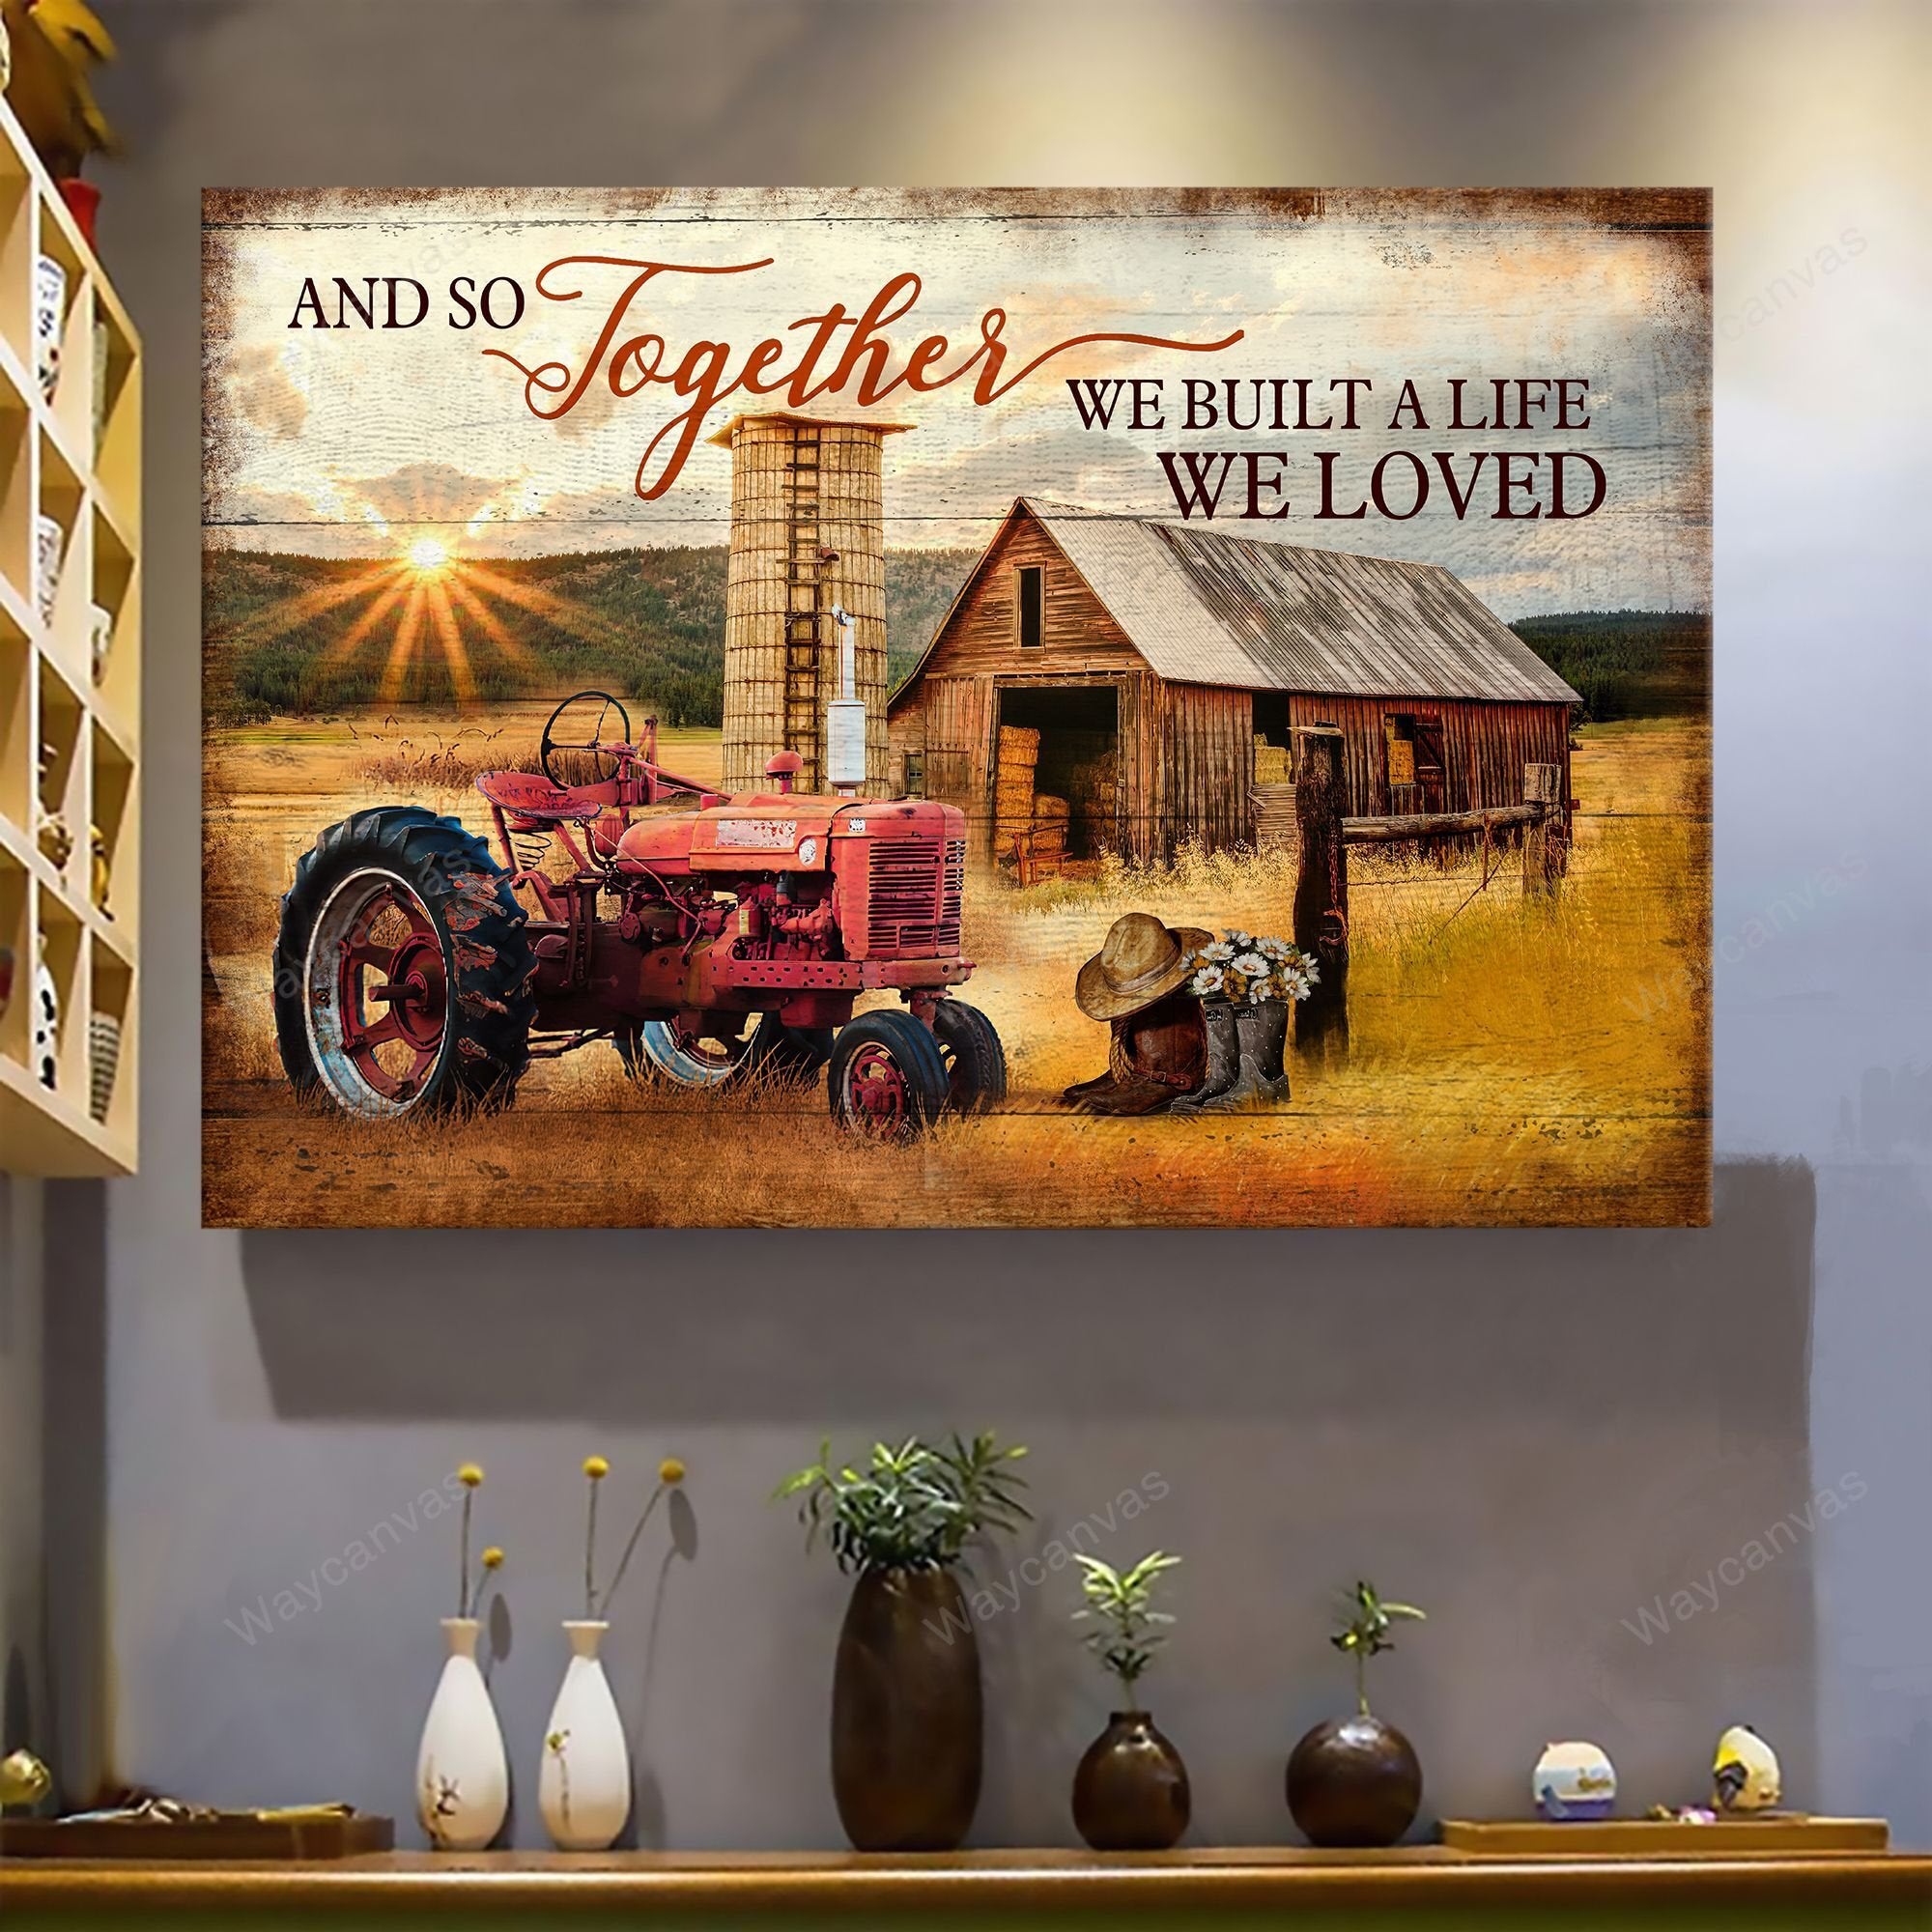 Old Barn Painting, Electric Tricycle, Sunset Landscape, And so together we built the life we loved - Farm Landscape Canvas Prints, Wall Art